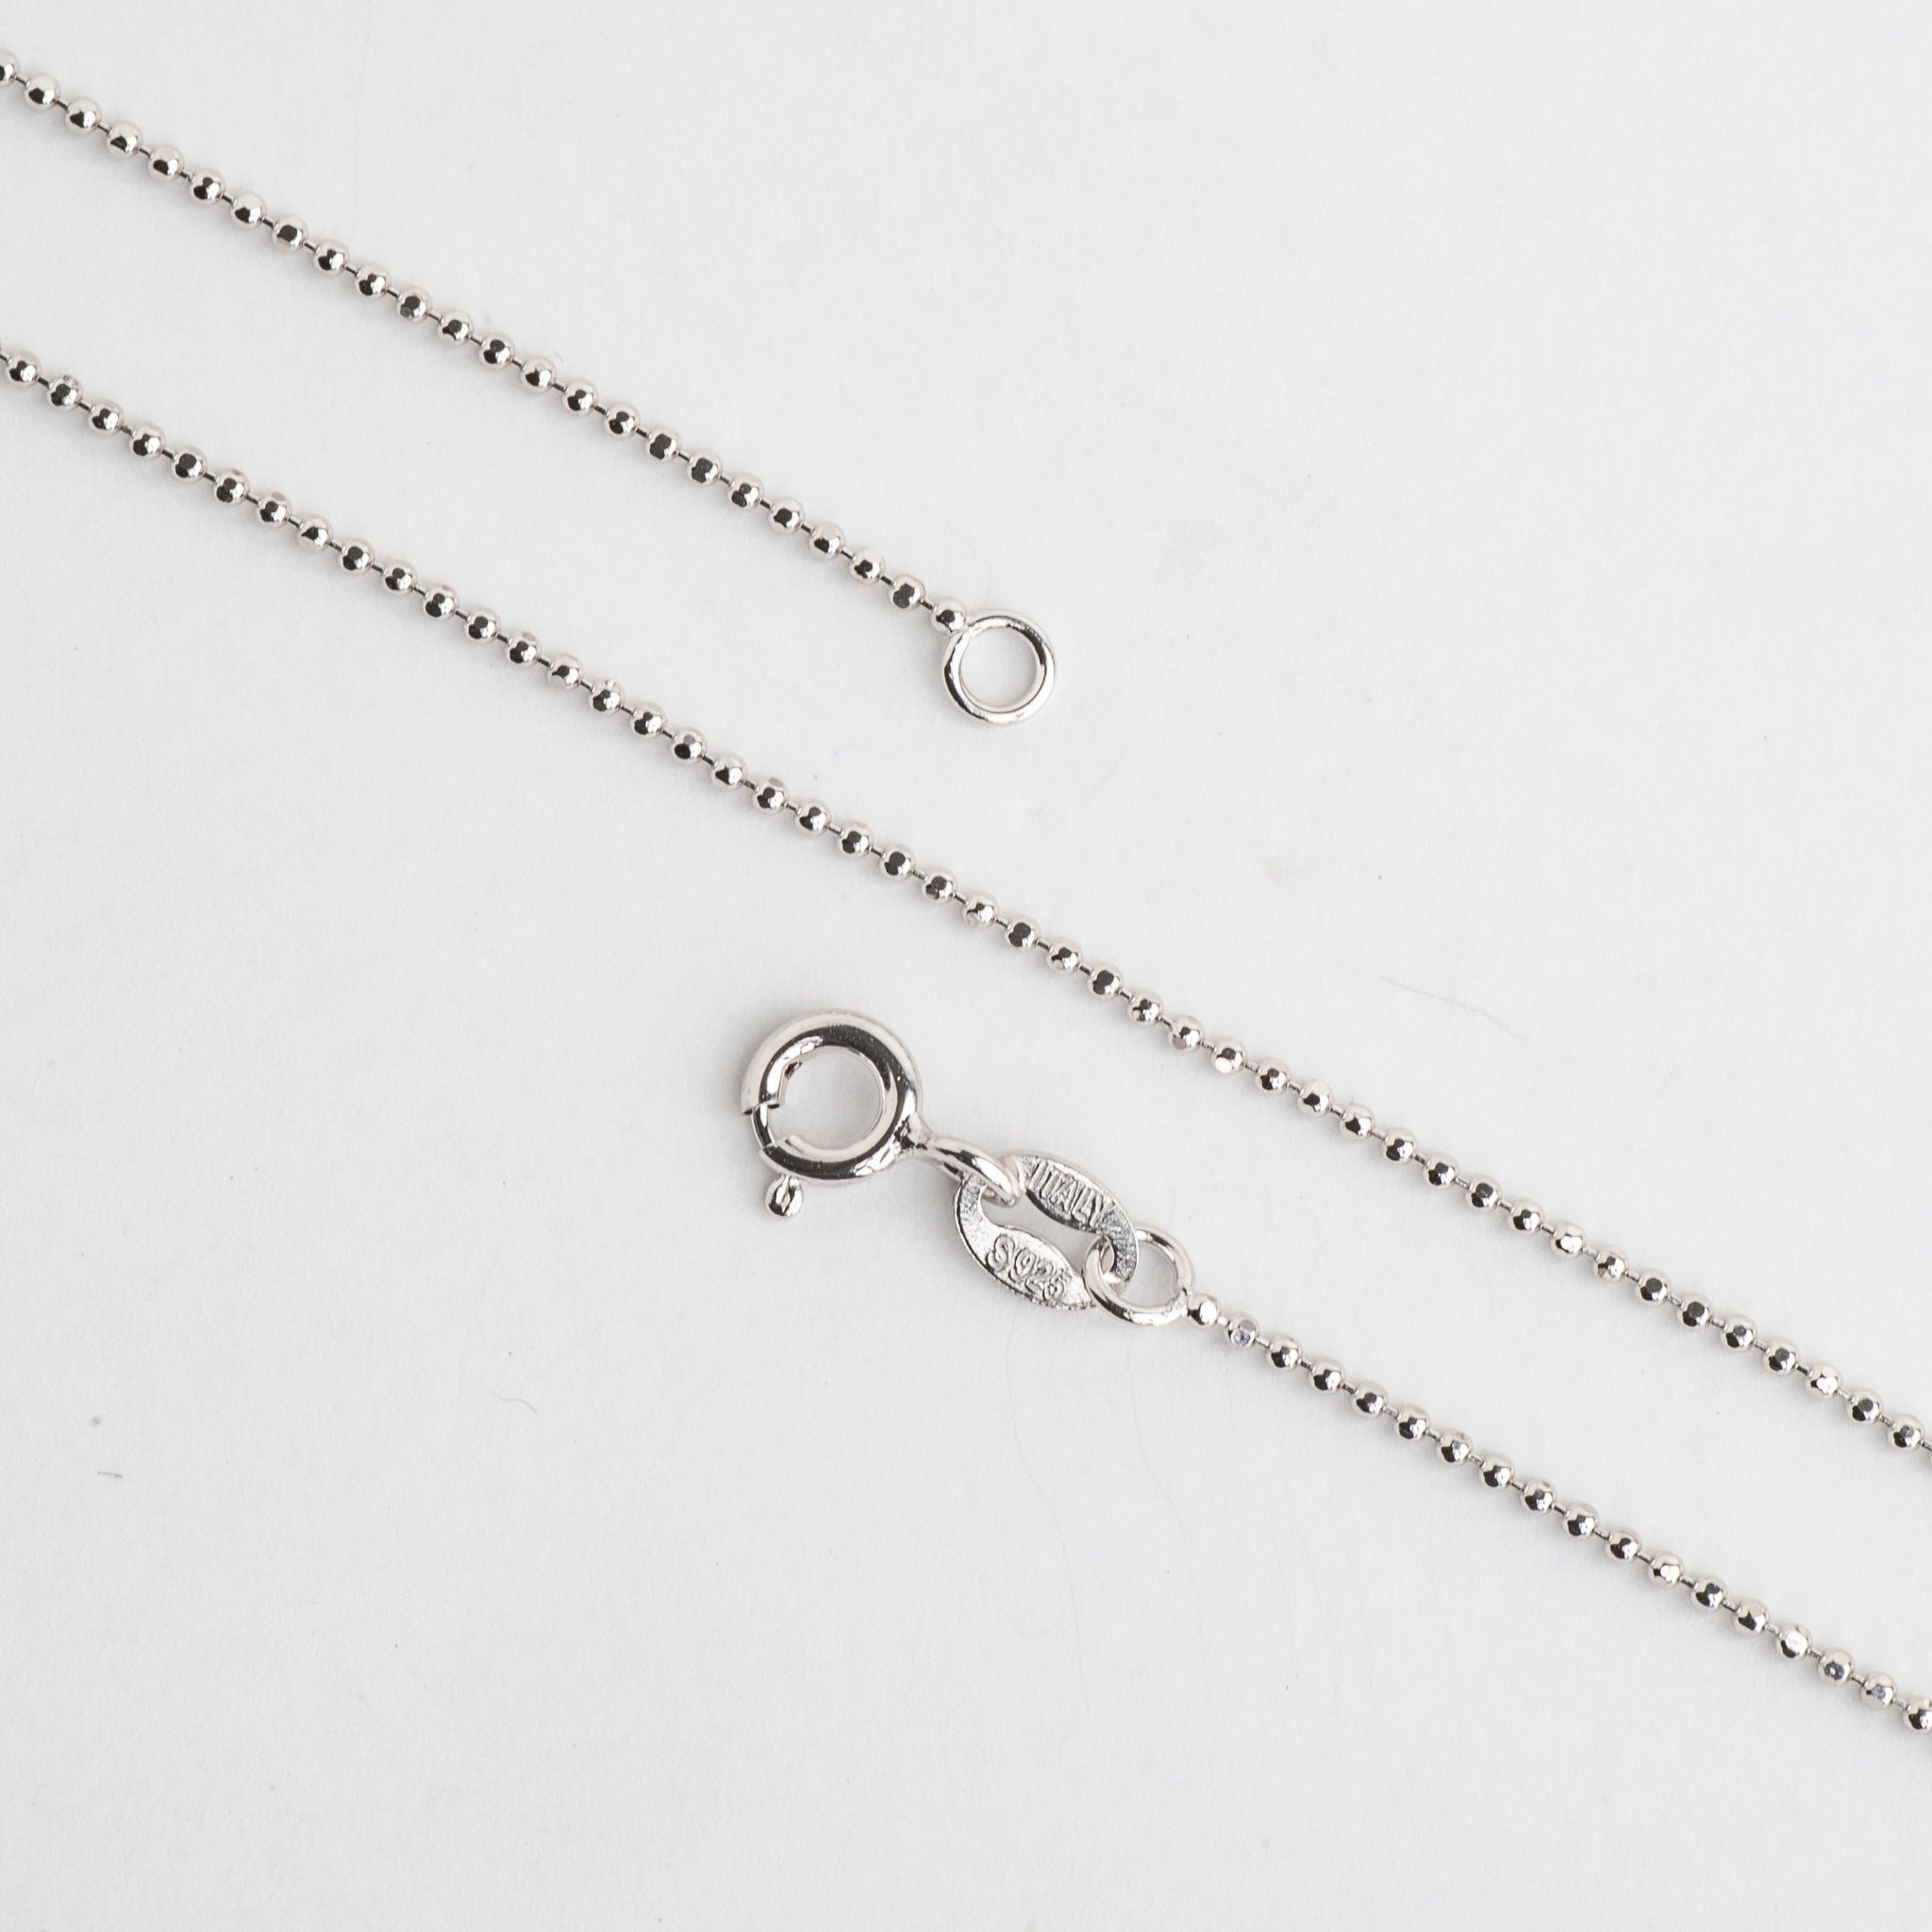 Necklace 16 inch N4ST 1mm Ball Chain Sterling Silver Necklace With Spring Ring Clasp Available in 3 Sizes Made in Italy .925 Sterling Silver N4ST16